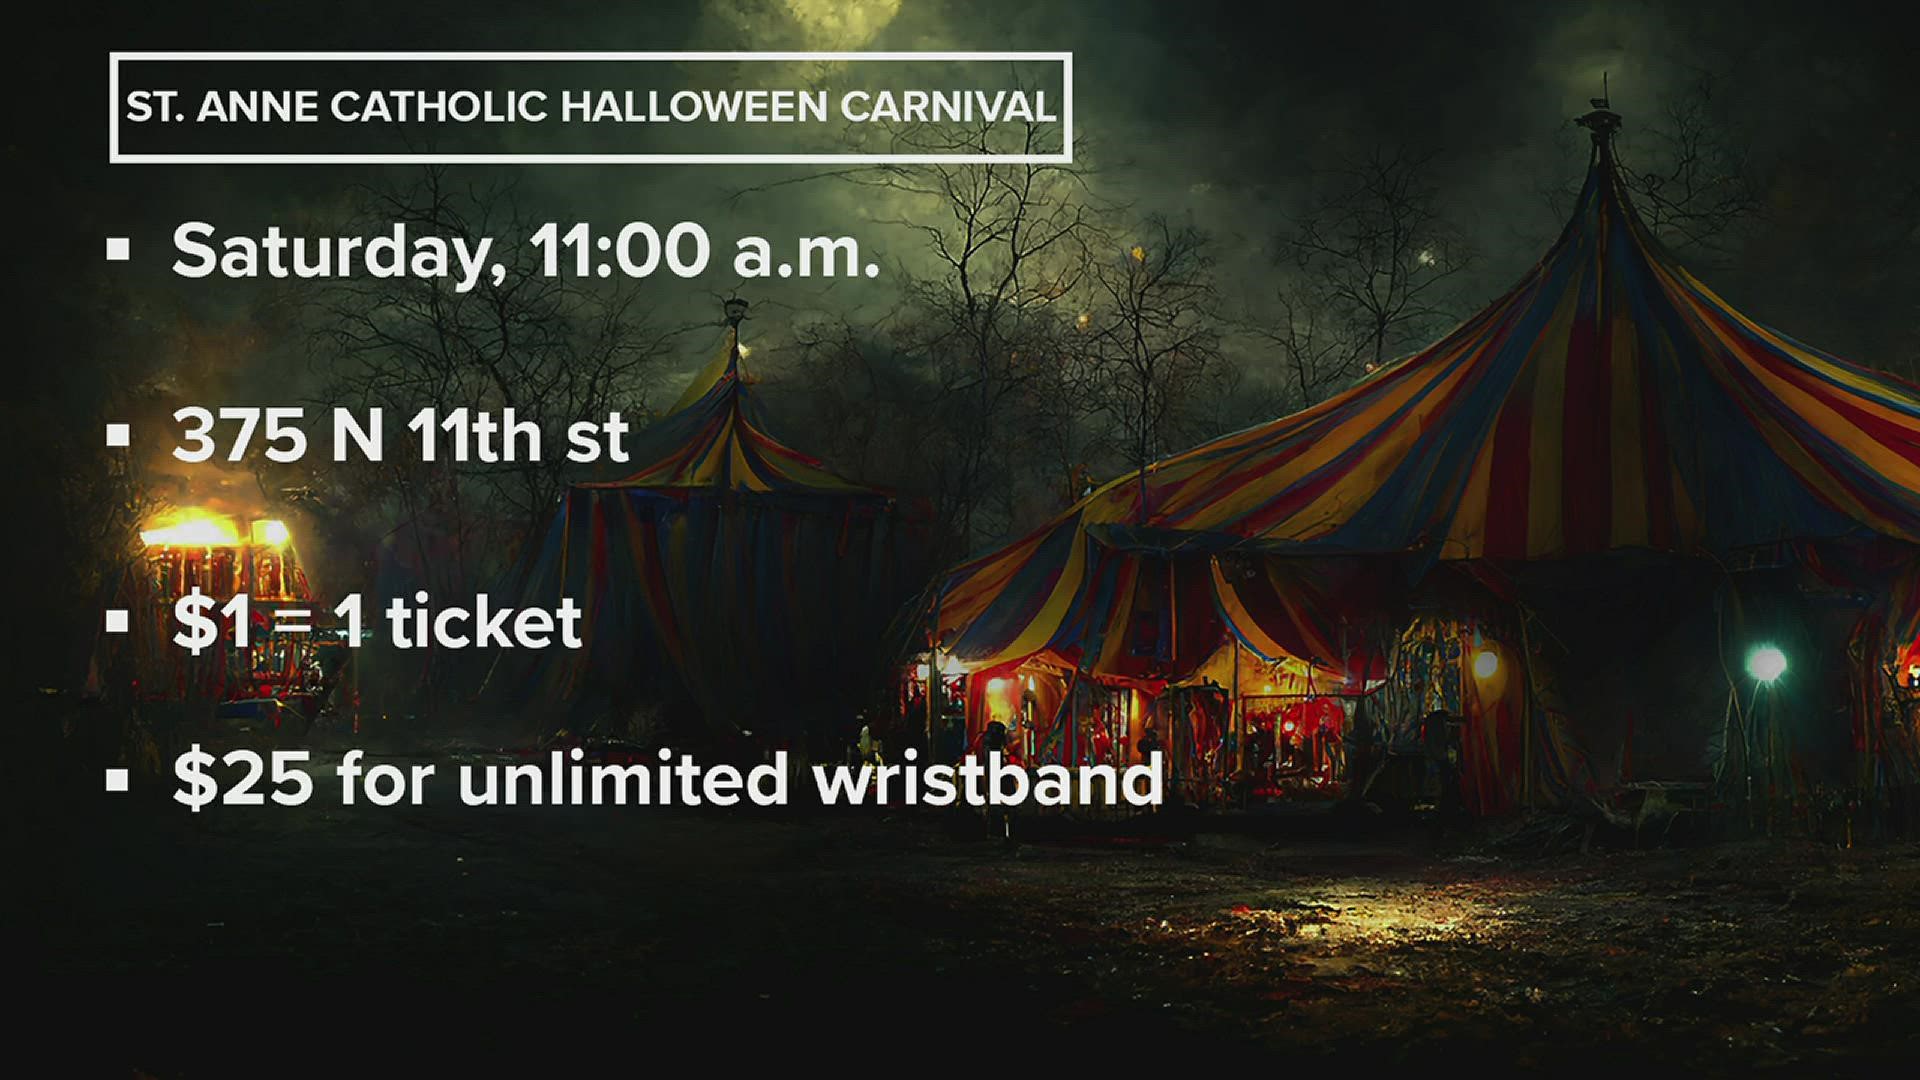 There will be inflatables, games, food and even a haunted house. The event is open to the public and will take place on Saturday, October 29 from 11 a.m. to 4 p.m.